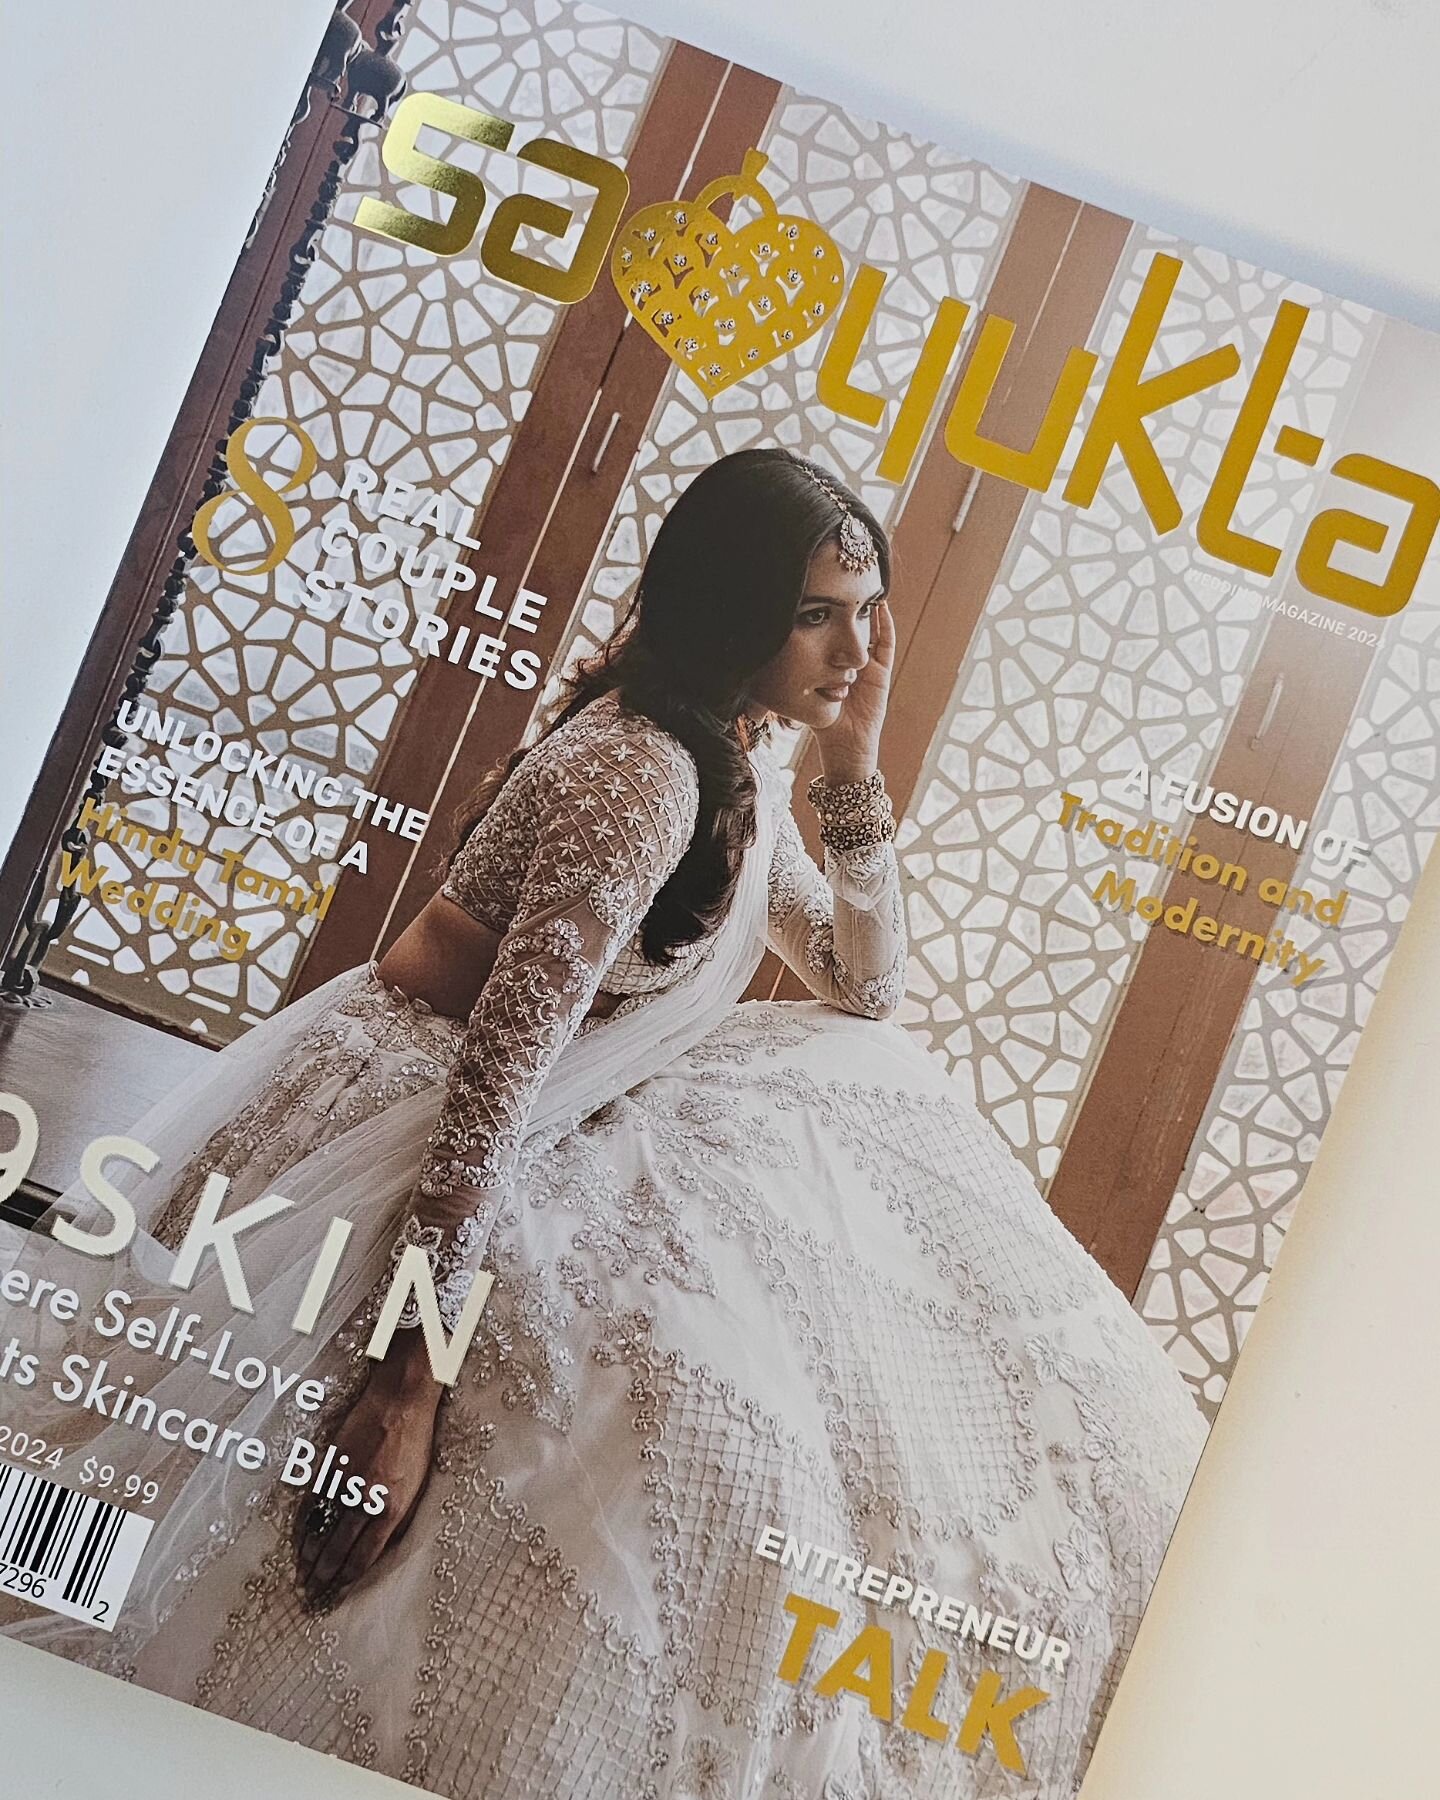 A full editorial spread on our small but mighty journey in the 2024 @samyuktaweddingshow magazine! ✨️

Feeling grateful for everyONE &amp; everyTHING that has been part of this adventure. 

Special shoutout to the magic behind this feature! ❤️

@suja